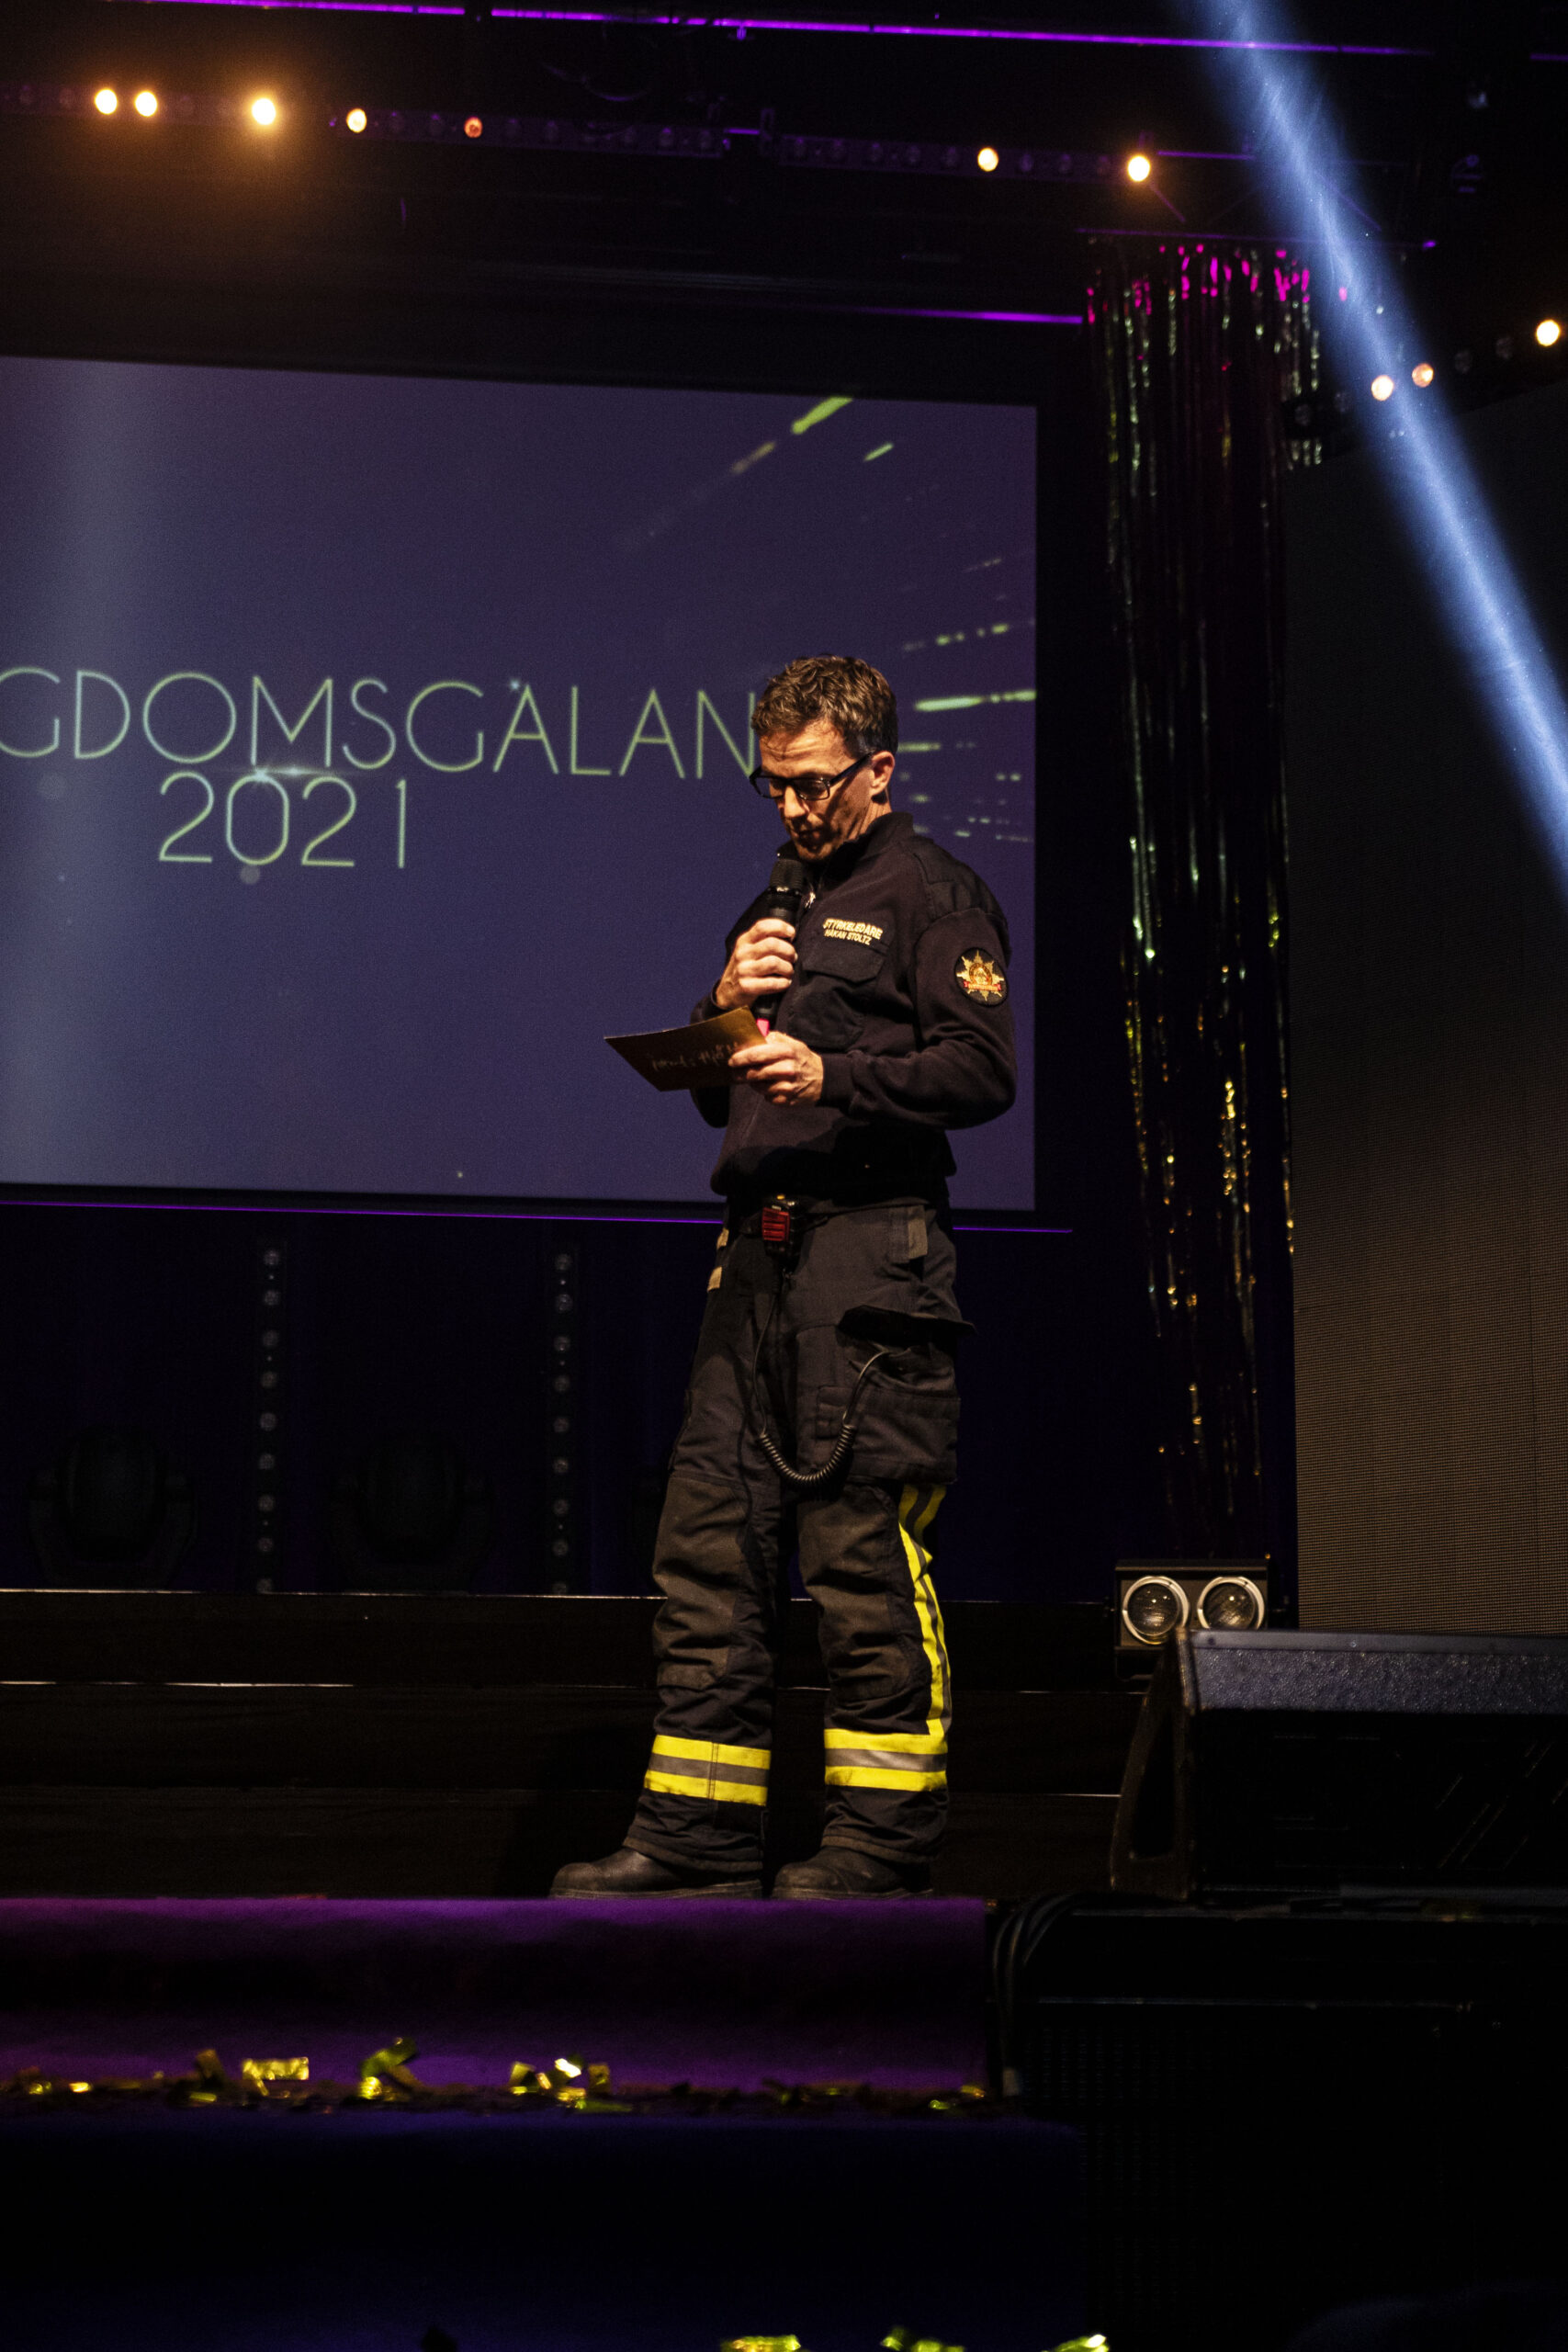 Ungdomsgalan – The Annual Youth Award